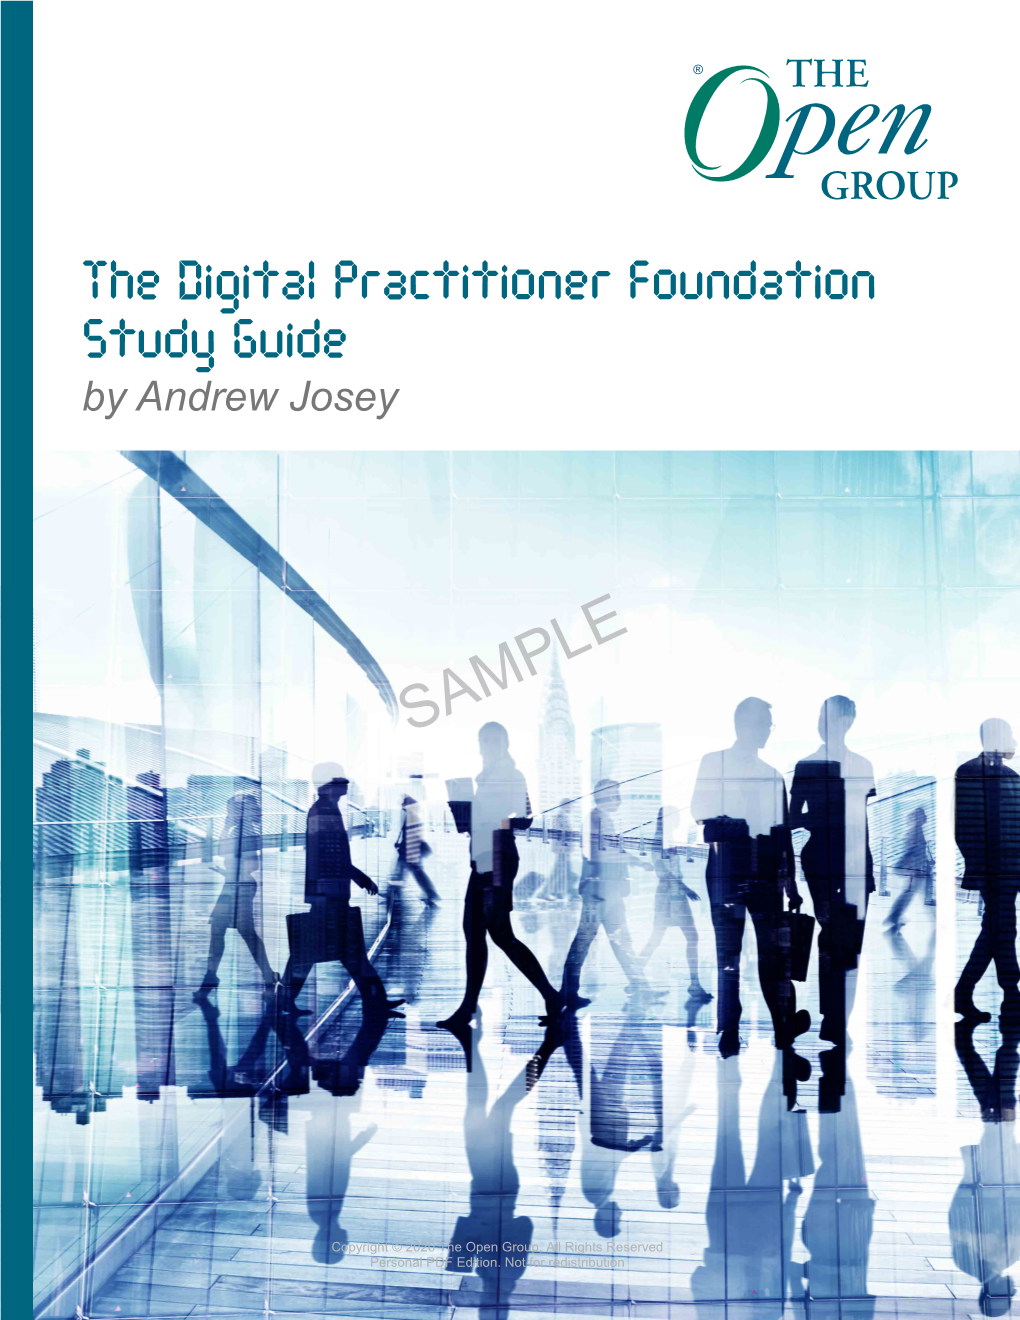 The Digital Practitioner Foundation Study Guide: by Andrew Josey